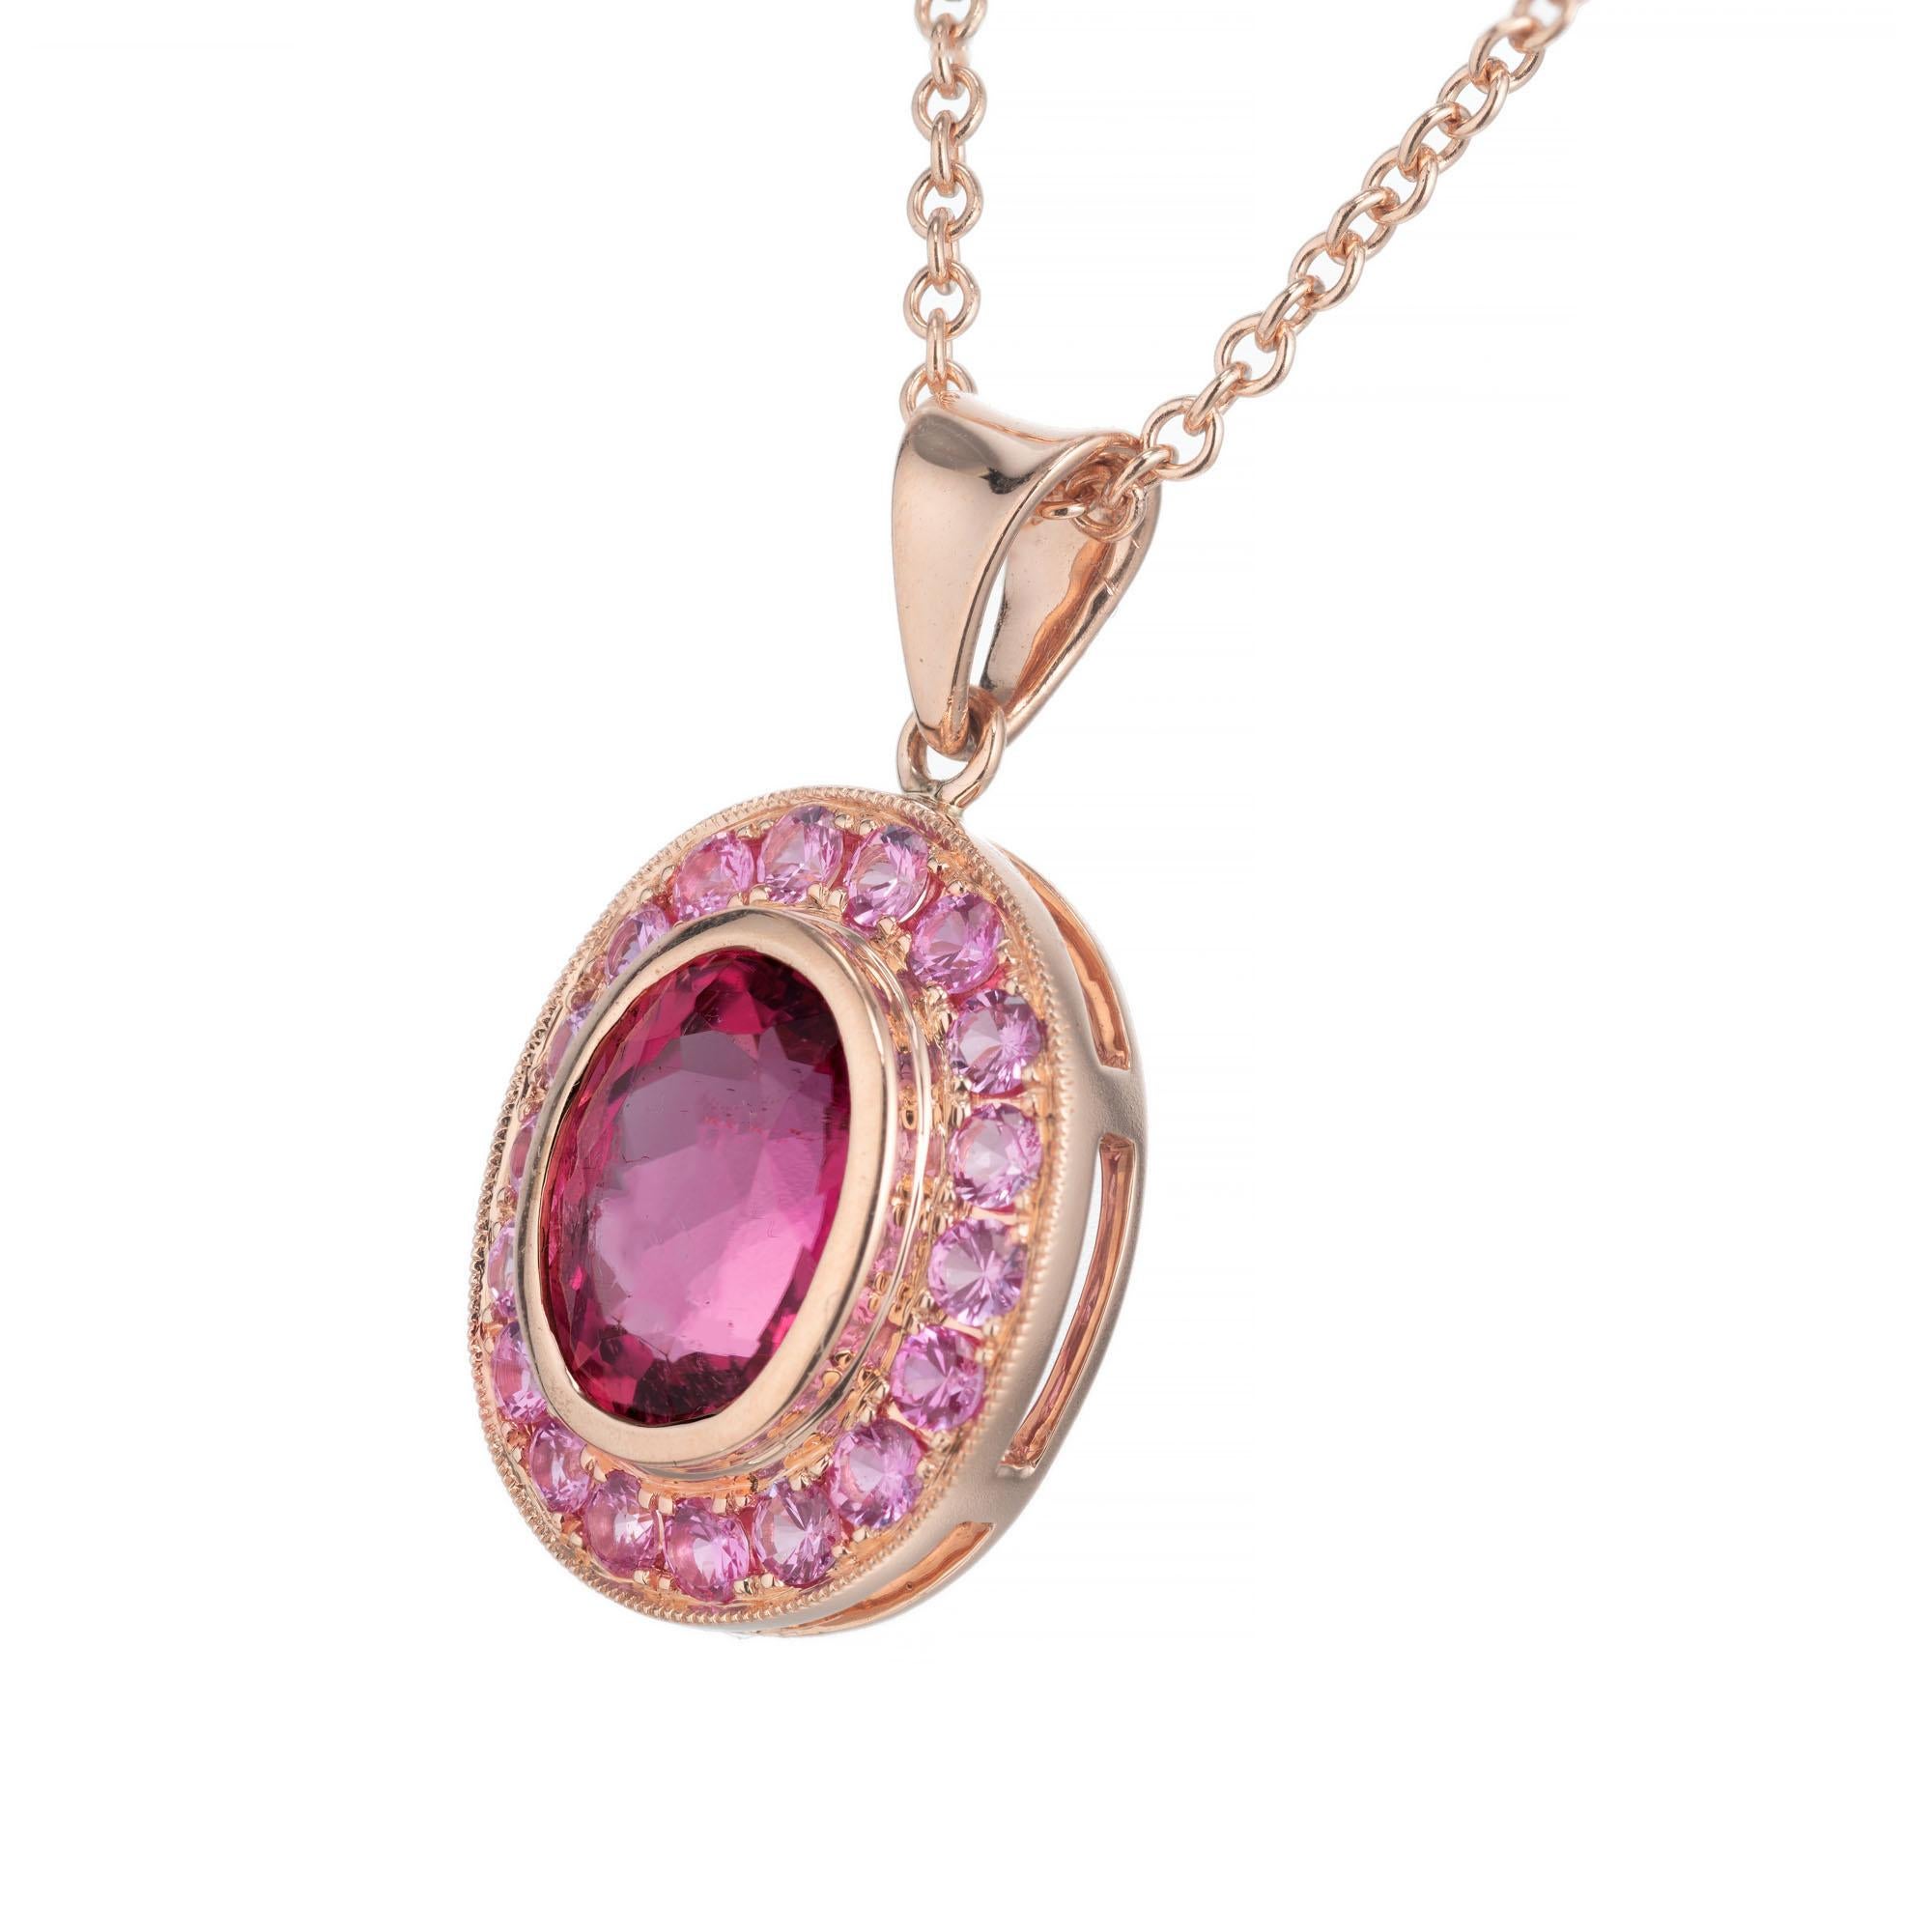 Oval pink tourmaline bezel set center stone with a halo of 18 round bead set pink sapphires, in 14k rose gold. 18 inch rose gold chain.  

 1 oval pink Tourmaline approx. total weight 2.15cts, 9.4 x 7.3mm. 
18 round pink sapphires approx. total